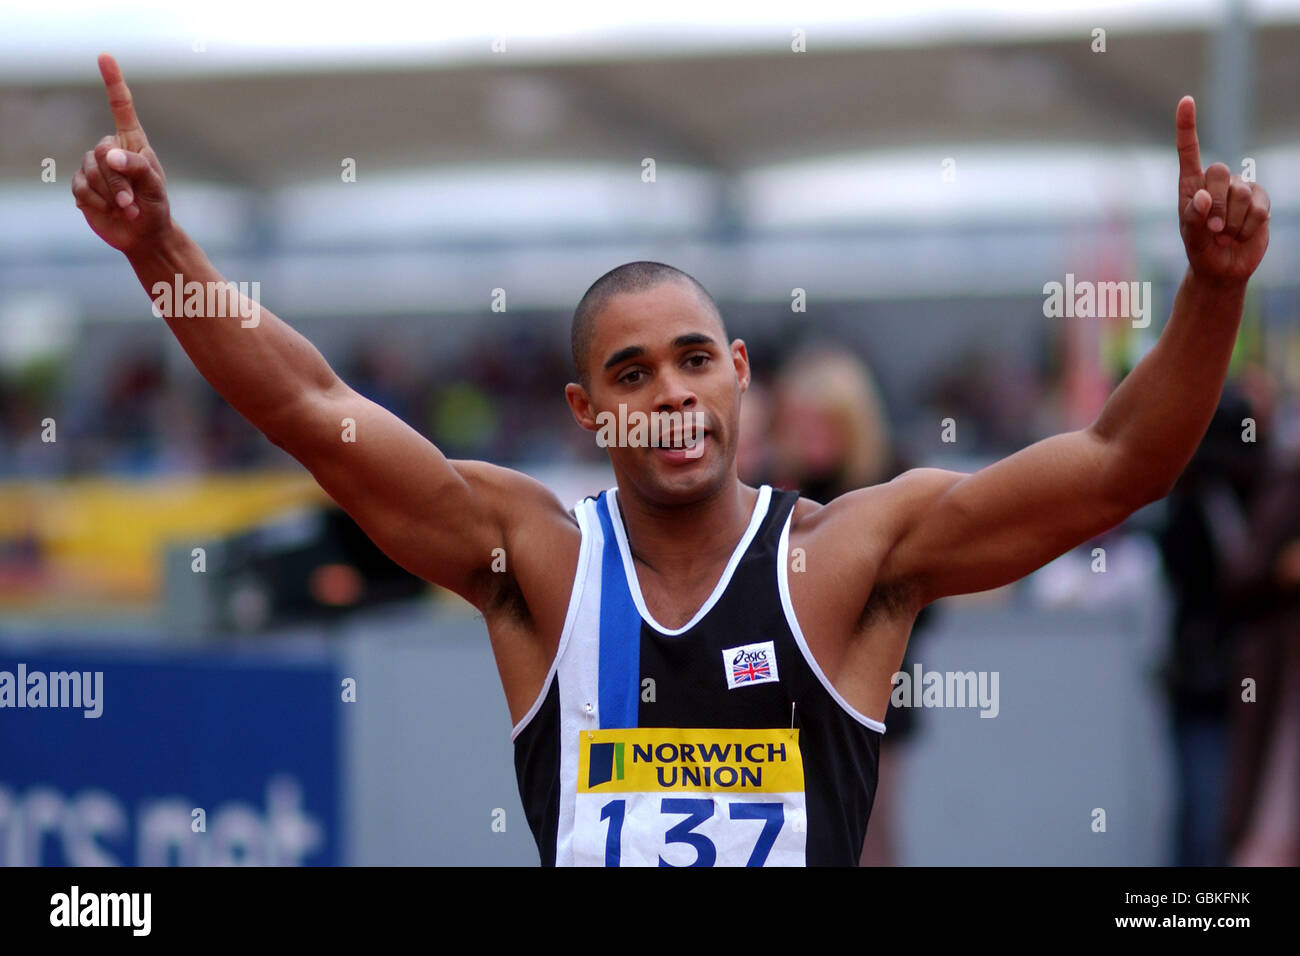 Wessex and Bath's Jason Gardener celebrates his victory in the mens 100m Stock Photo